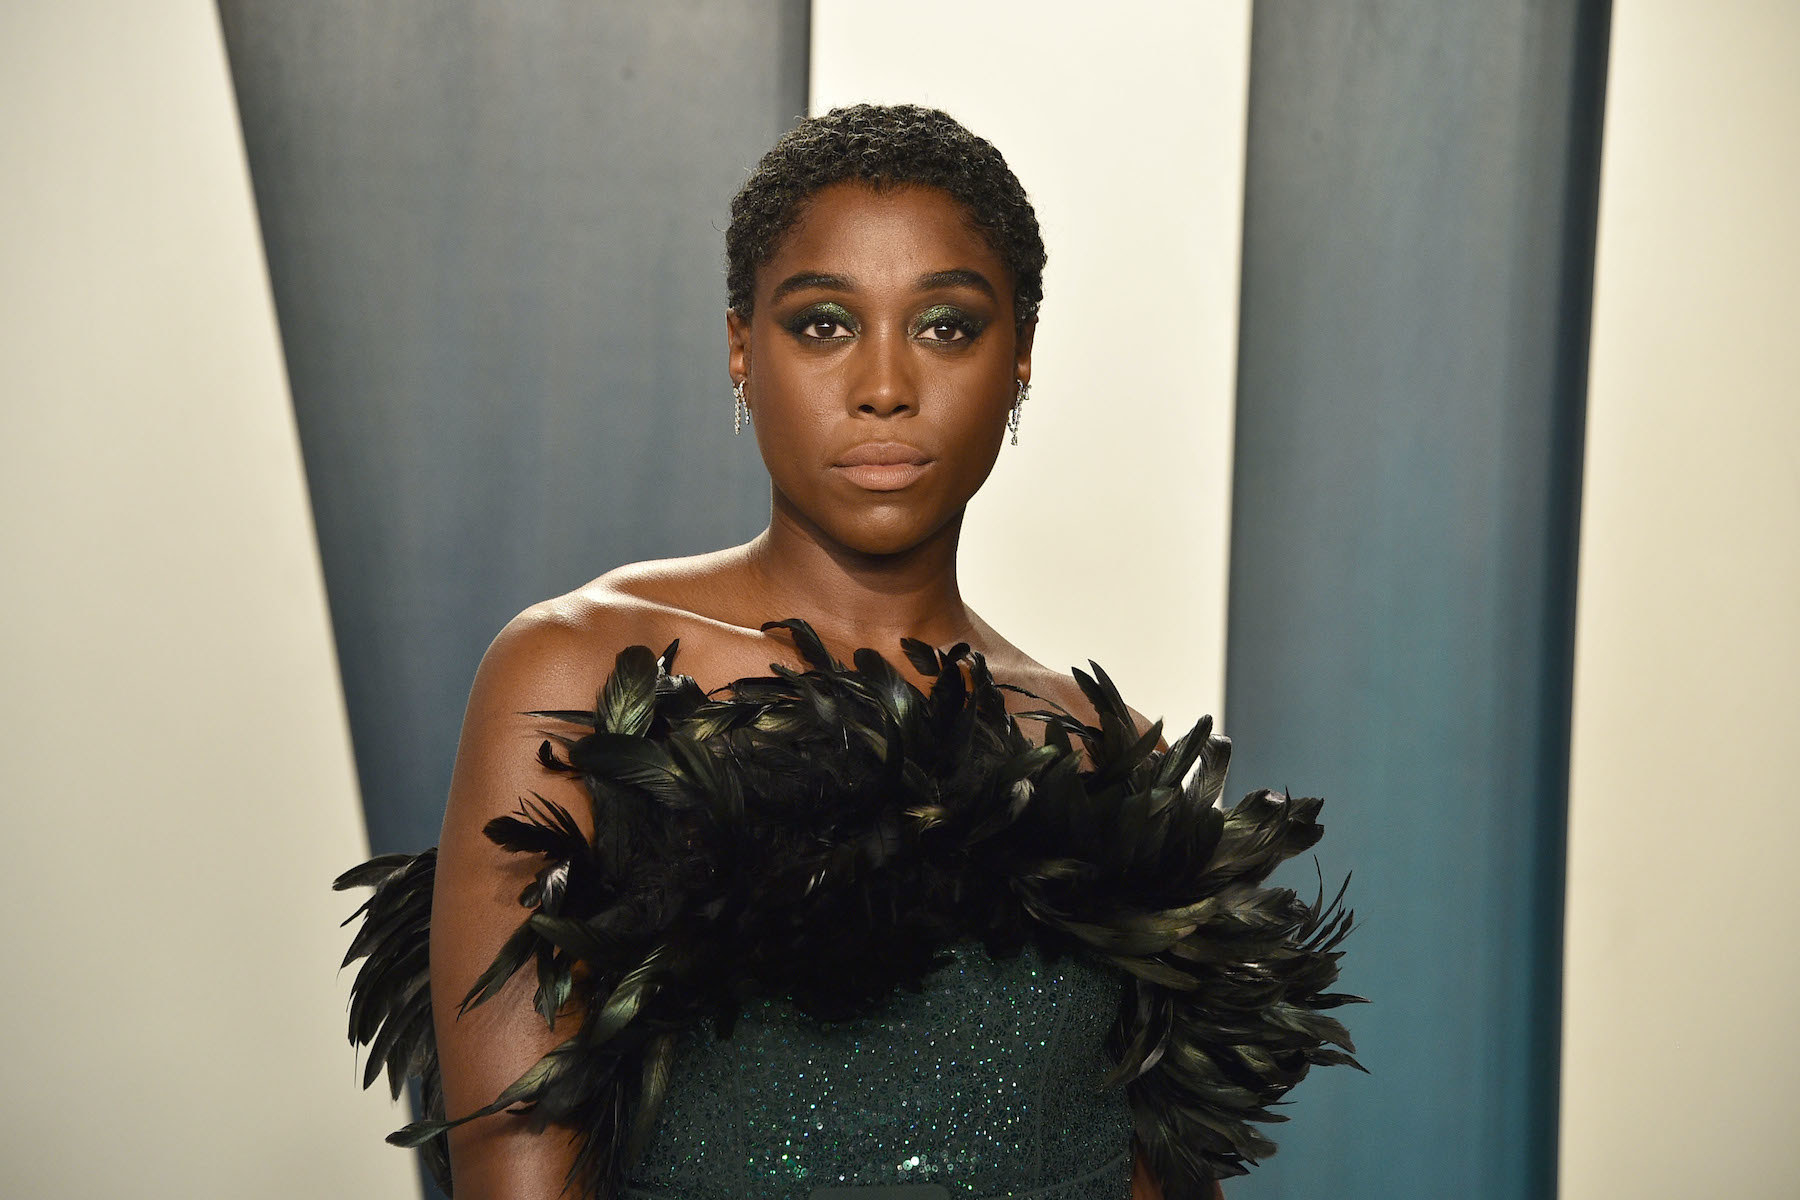 Lashana Lynch attends the 2020 Vanity Fair Oscar Party at Wallis Annenberg Center for the Performing Arts on February 09, 2020 in Beverly Hills, California.